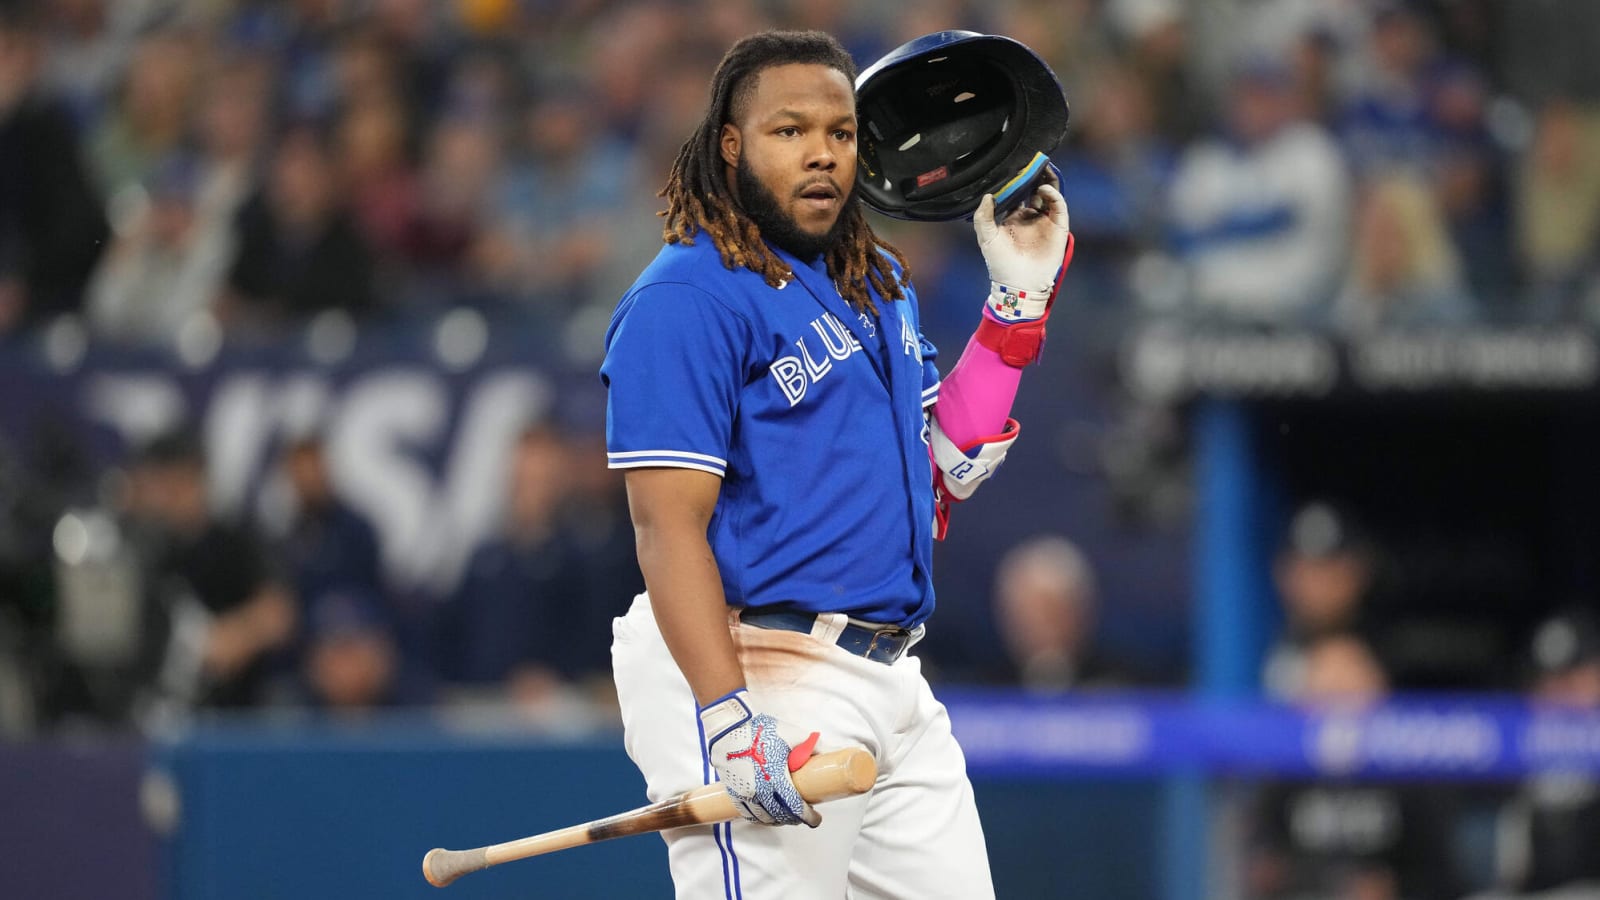 Watch: Vladimir Guerrero Jr. commits big mistake in Game 2 against Twins